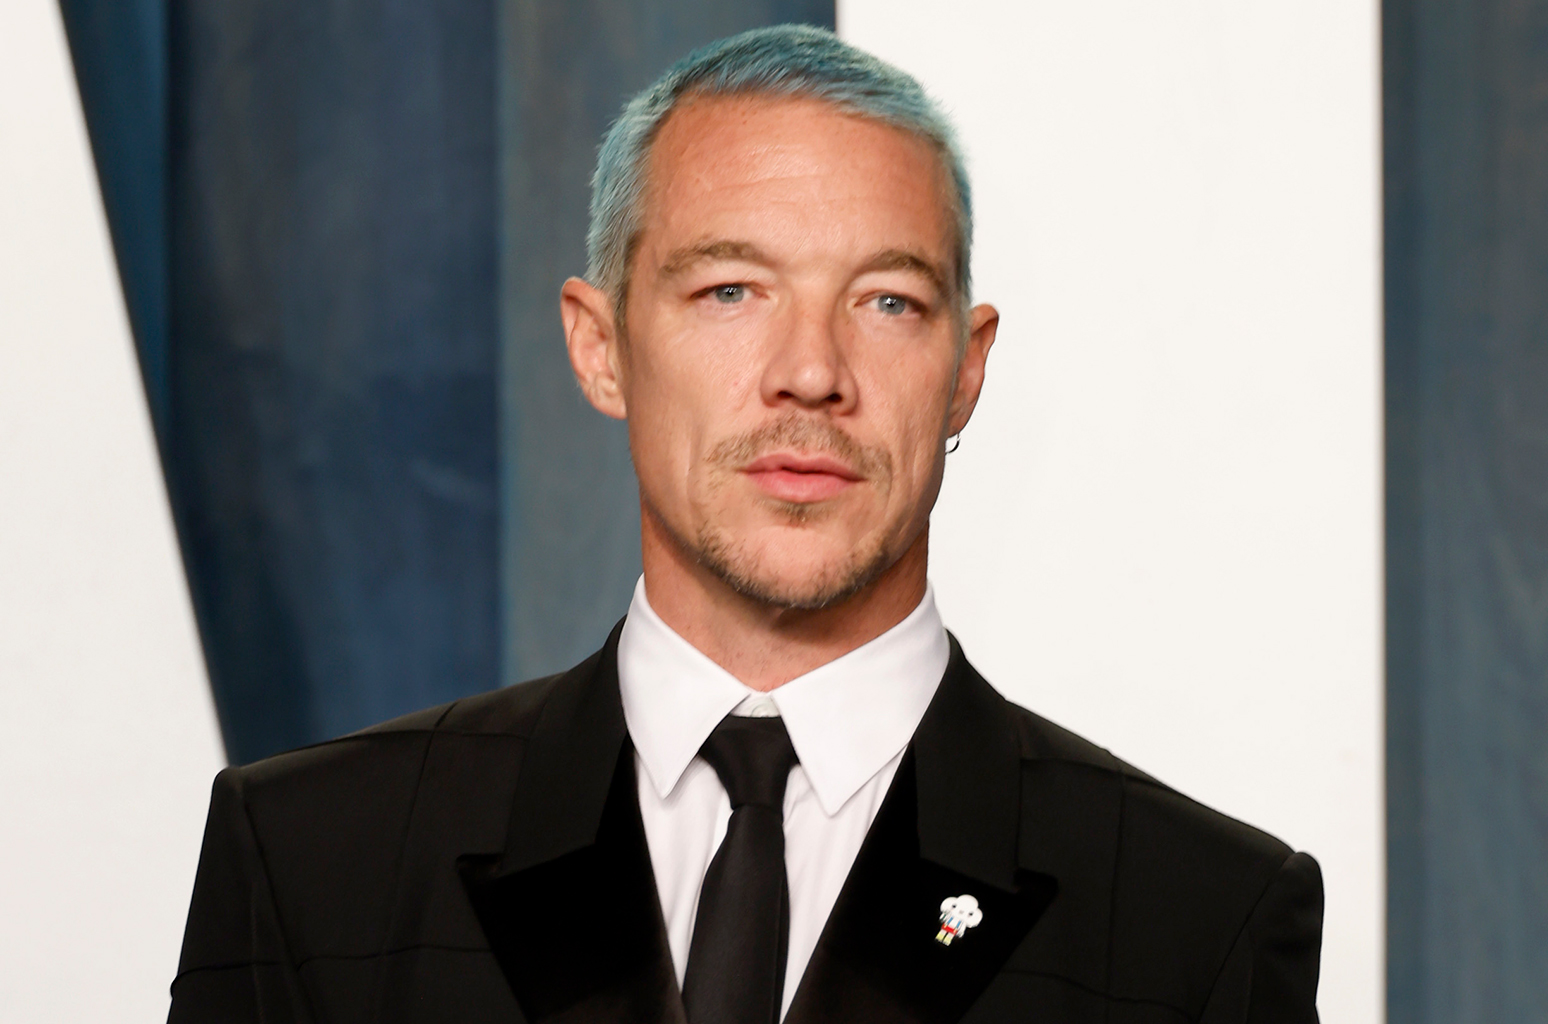 Diplo Says Beyoncé ‘Deserves Her Flowers’ After Dance/Electronic Grammys Wins